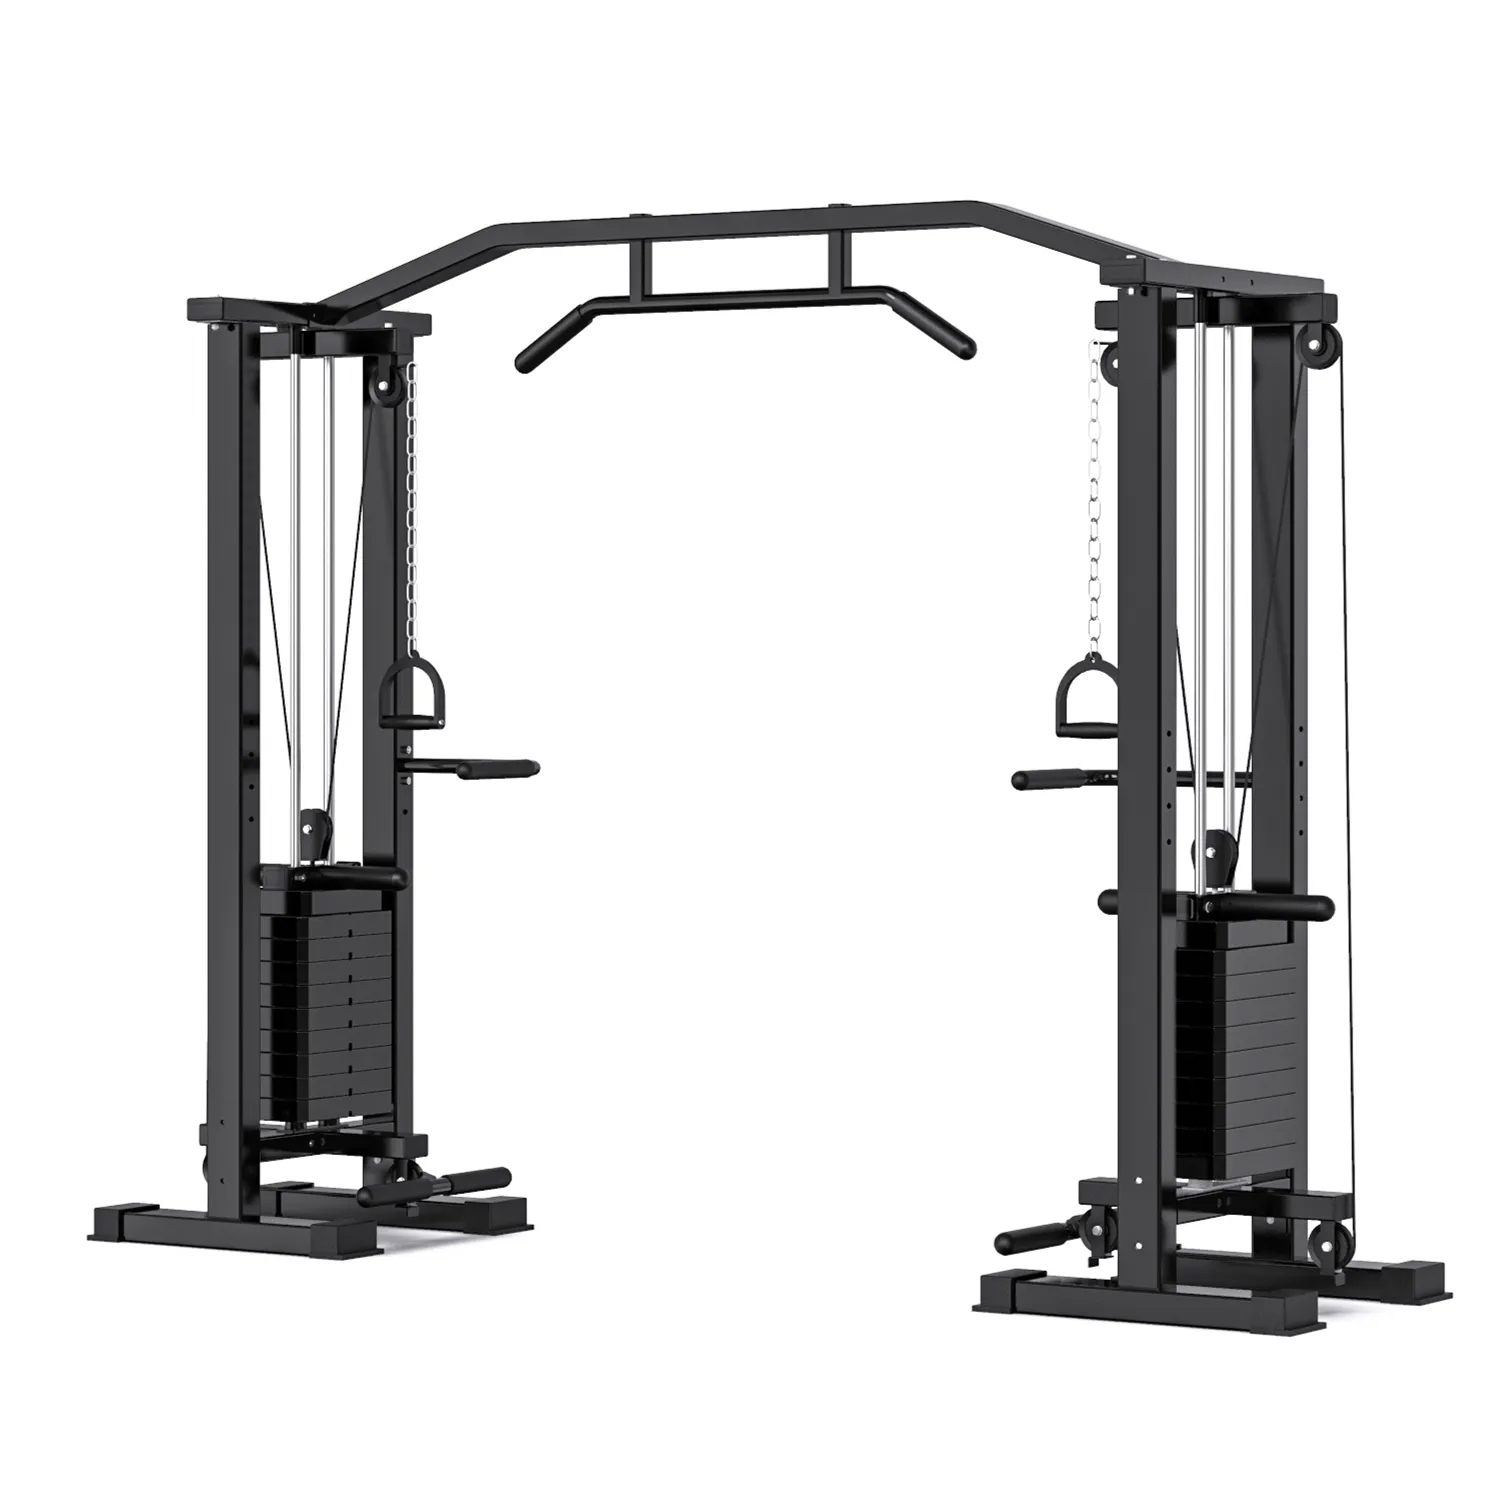 EMFitness Gym Equipment Multi-functional Crossover home gym with chinning up bar and pulling up station